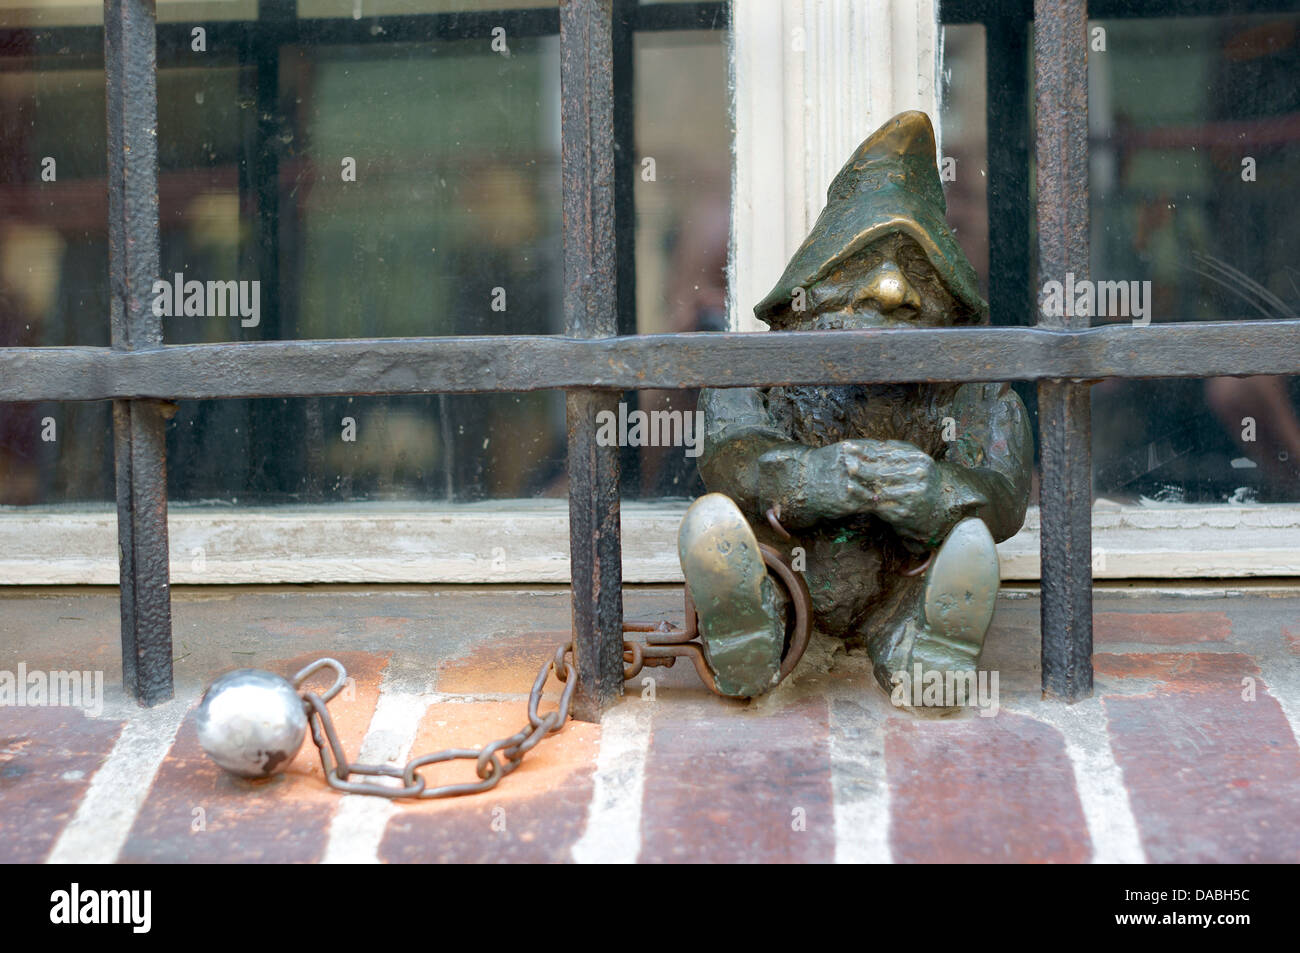 Figurine of dwarf with ball and chain behind iron bars Wroclaw Stock Photo